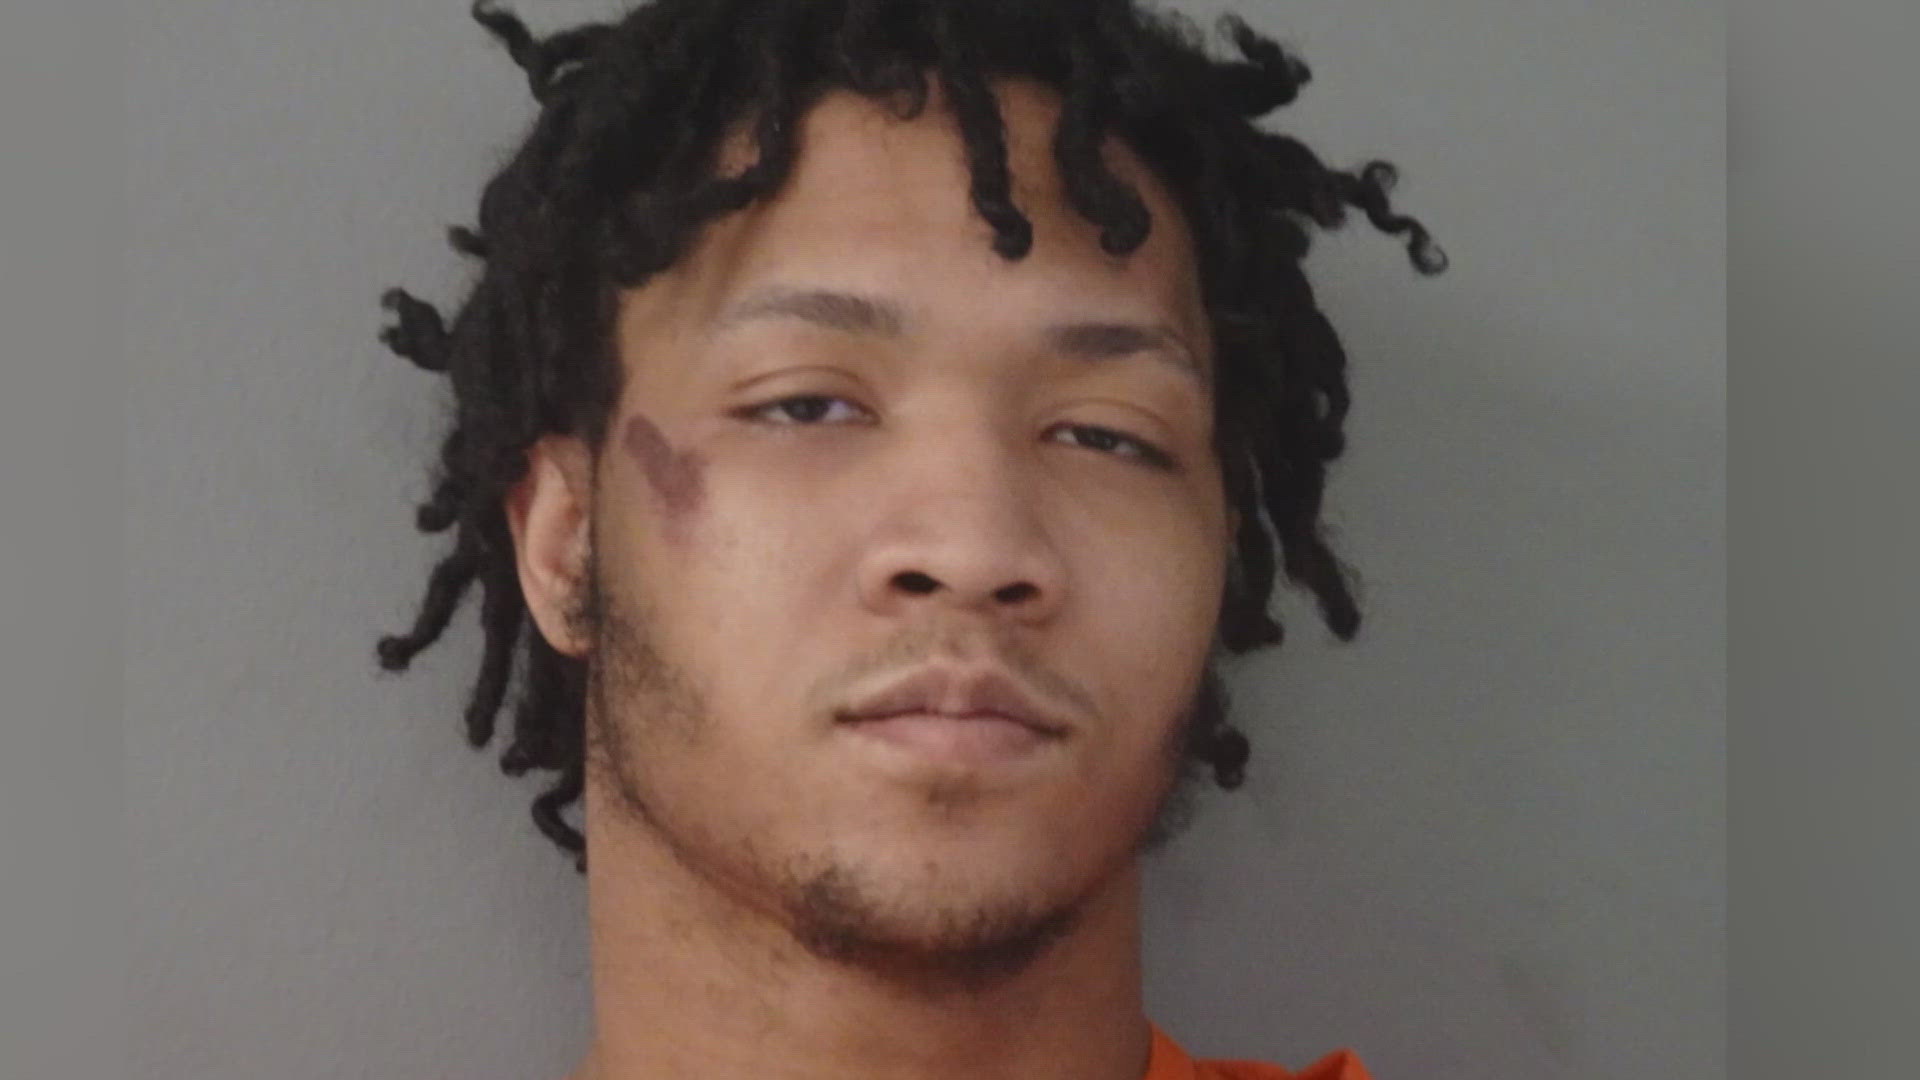 Amarion Sanders was taken into custody at approximately 9:30 a.m. on Wednesday.